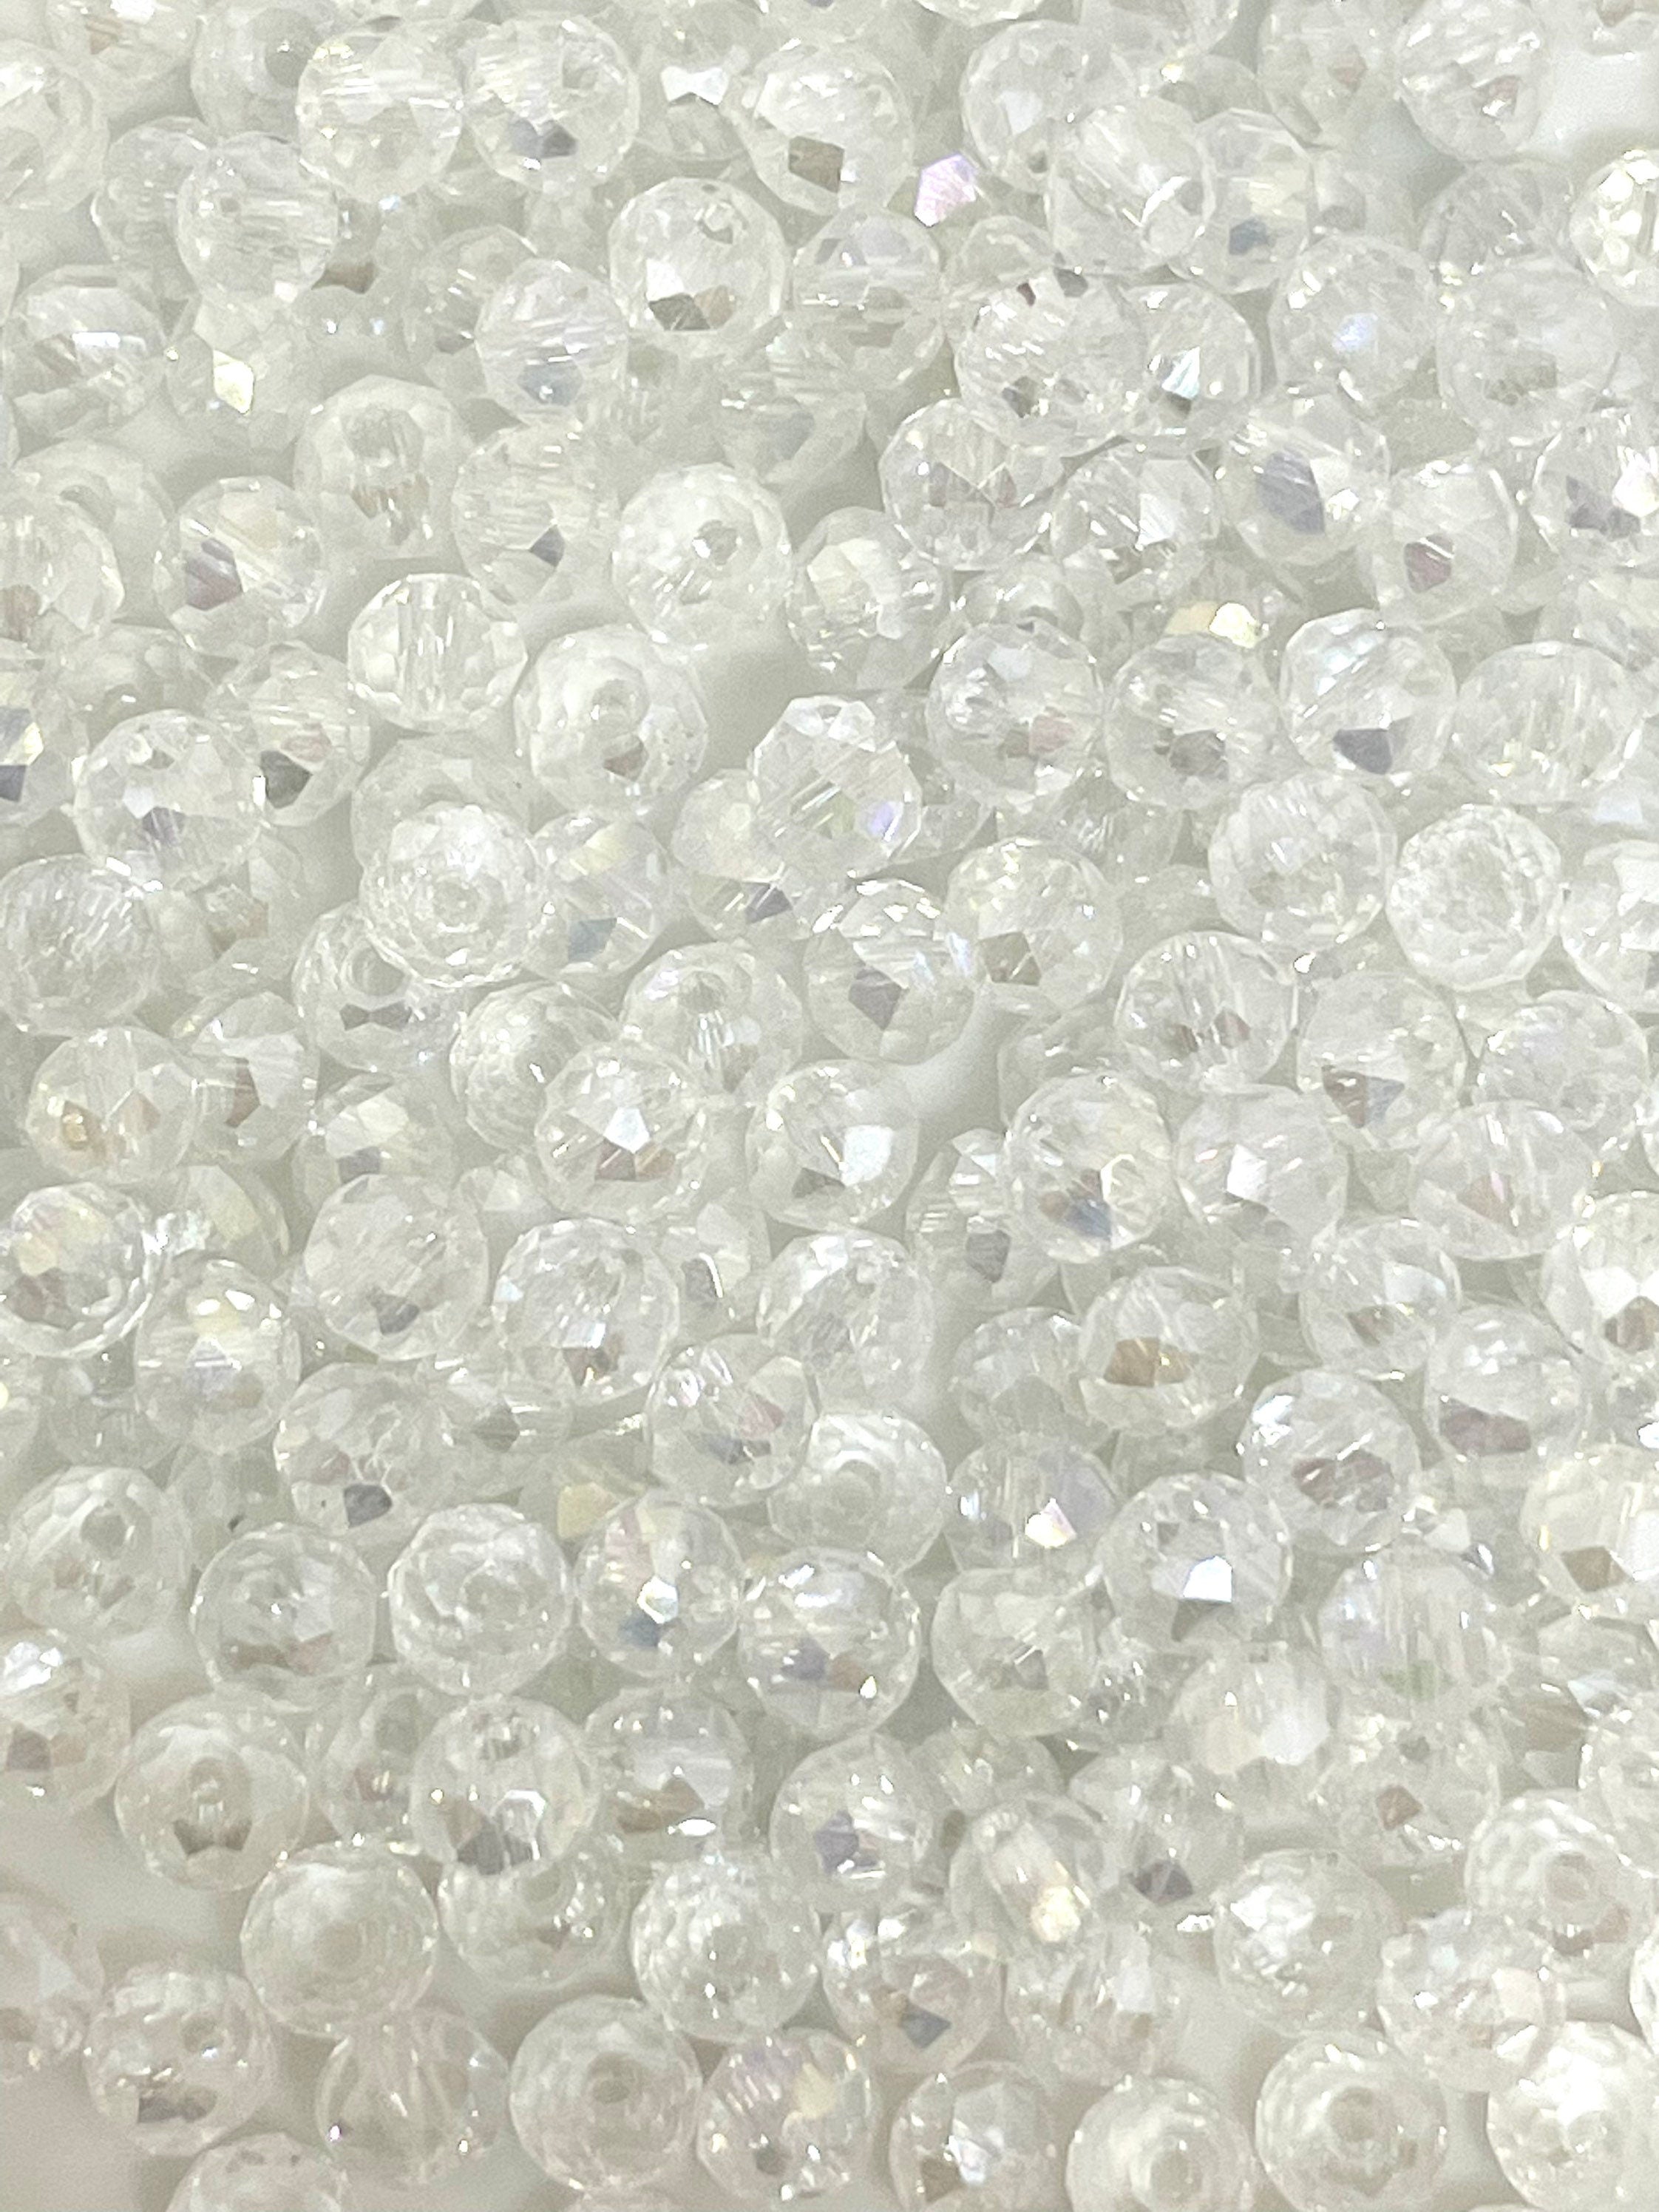 4mm Tiny Iridescent Faceted Beads